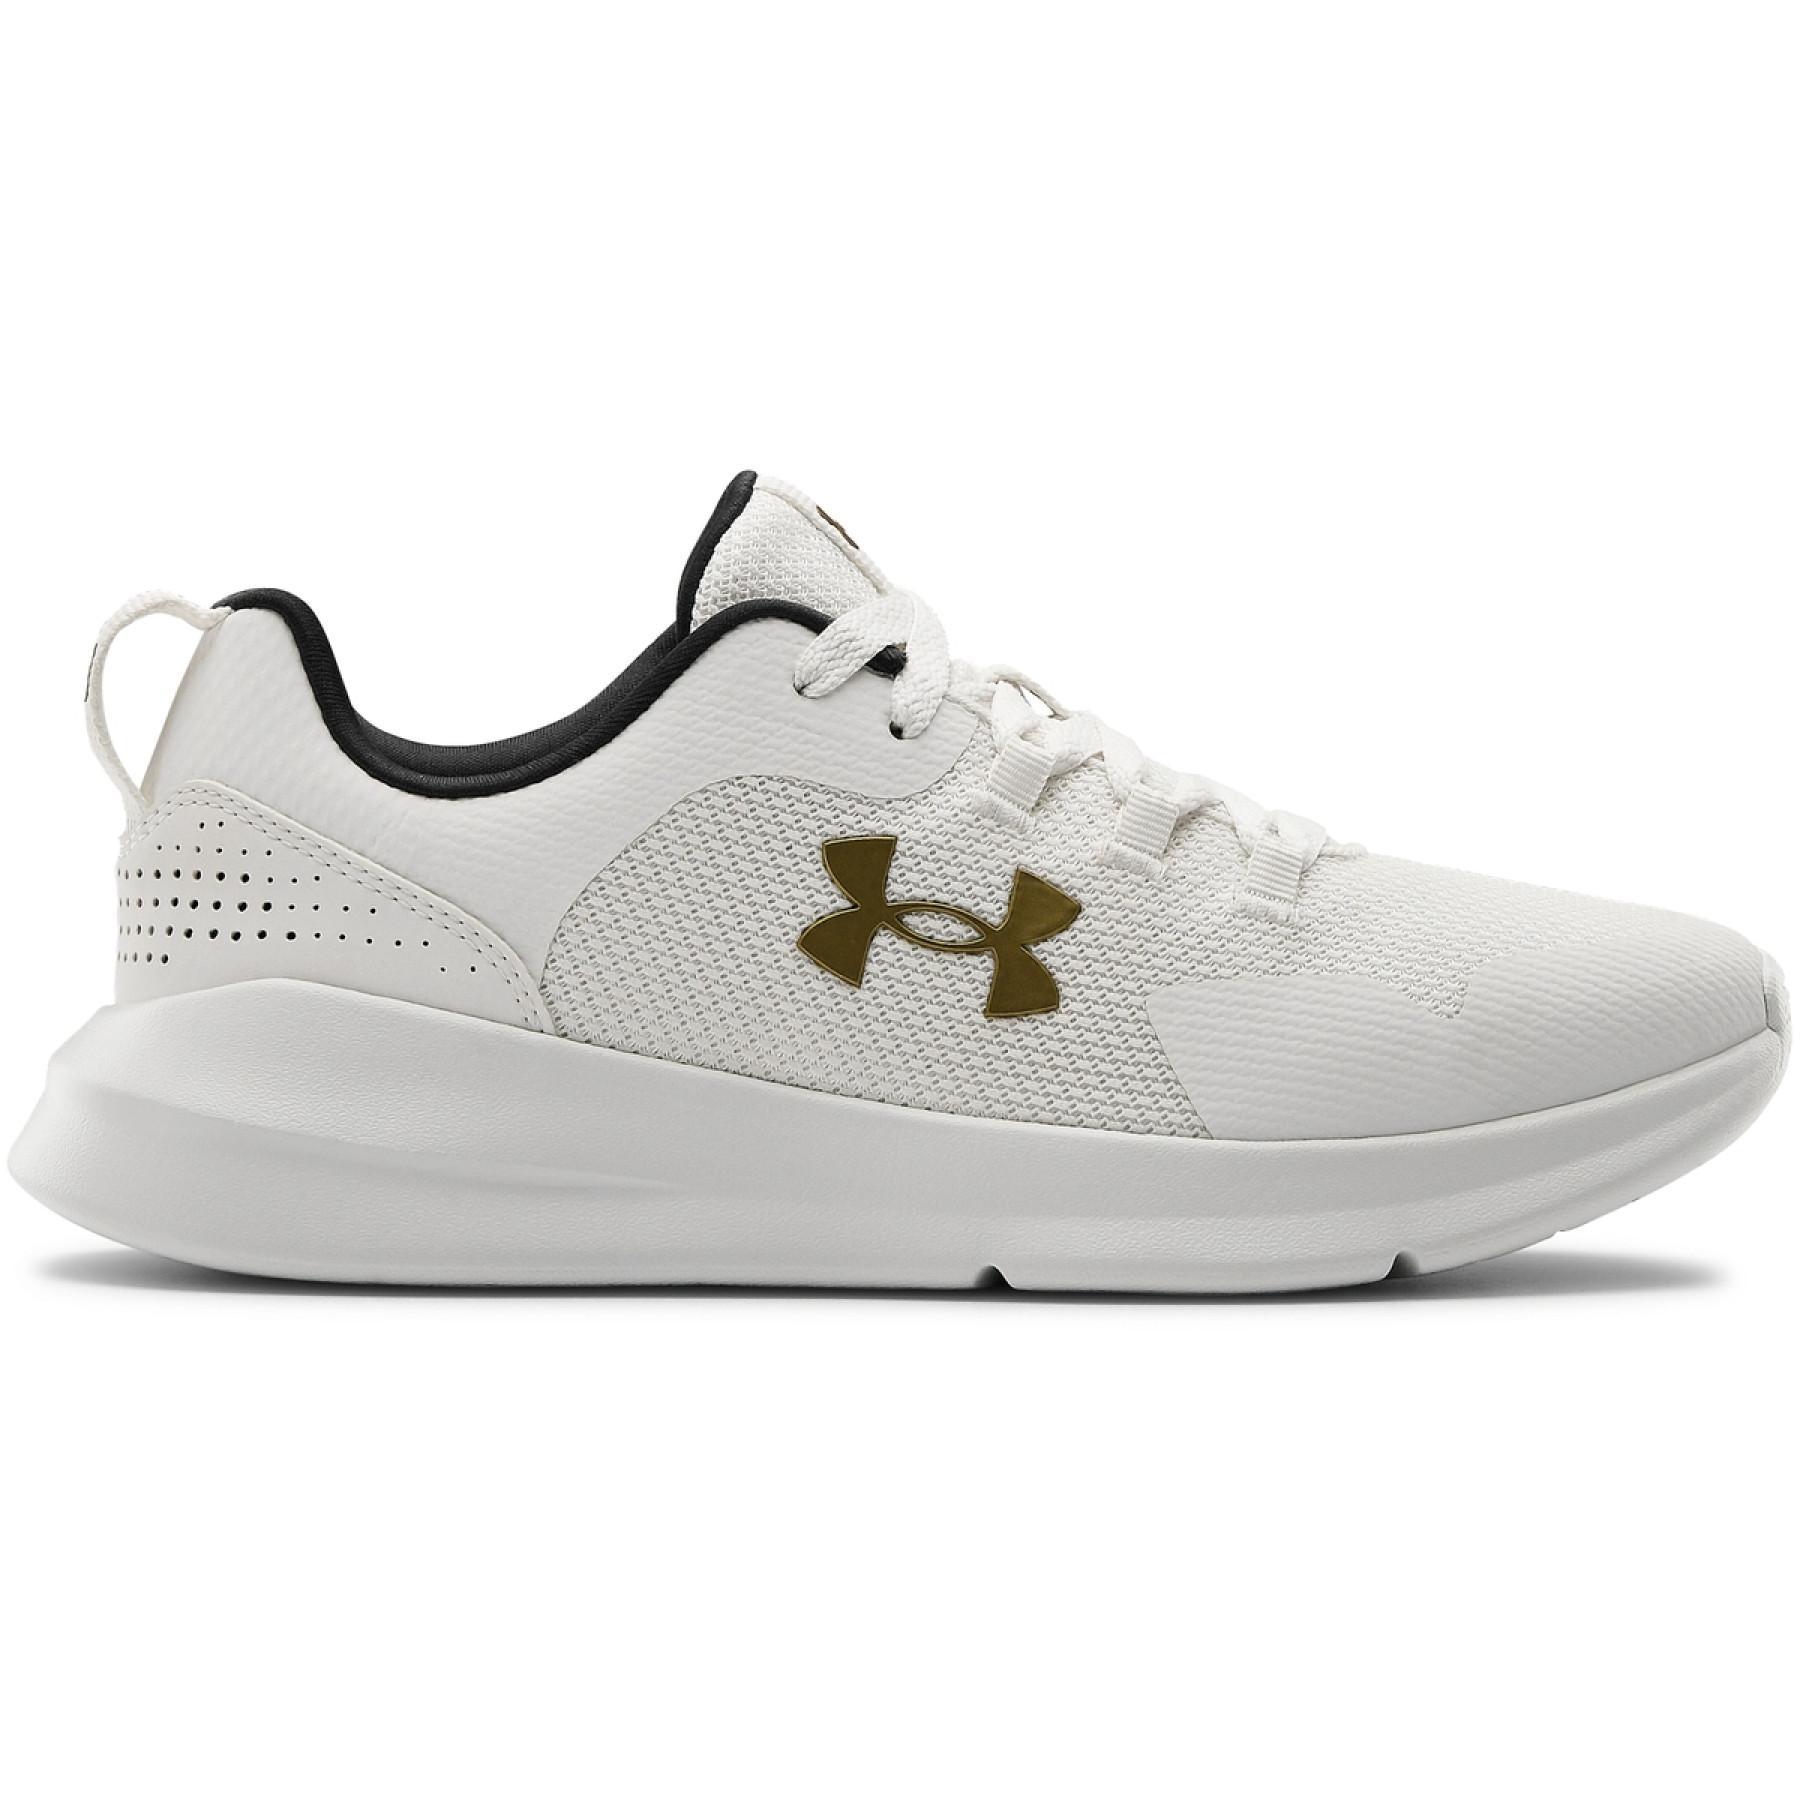 Chaussures femme Under Armour Essential Sportstyle